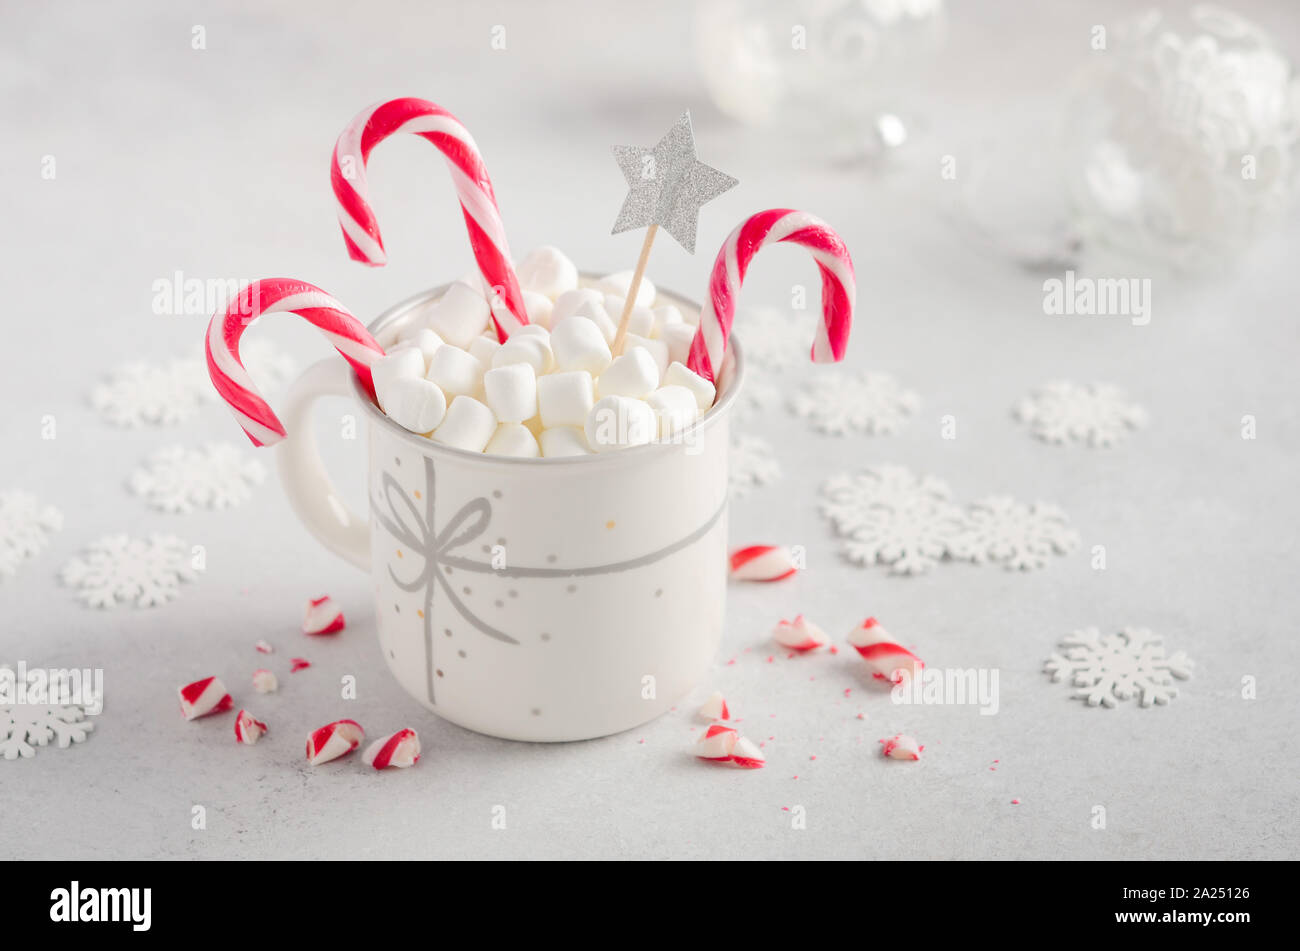 New Year or Christmas concept. Composition with marshmallows and candy canes on a gray concrete background. Stock Photo